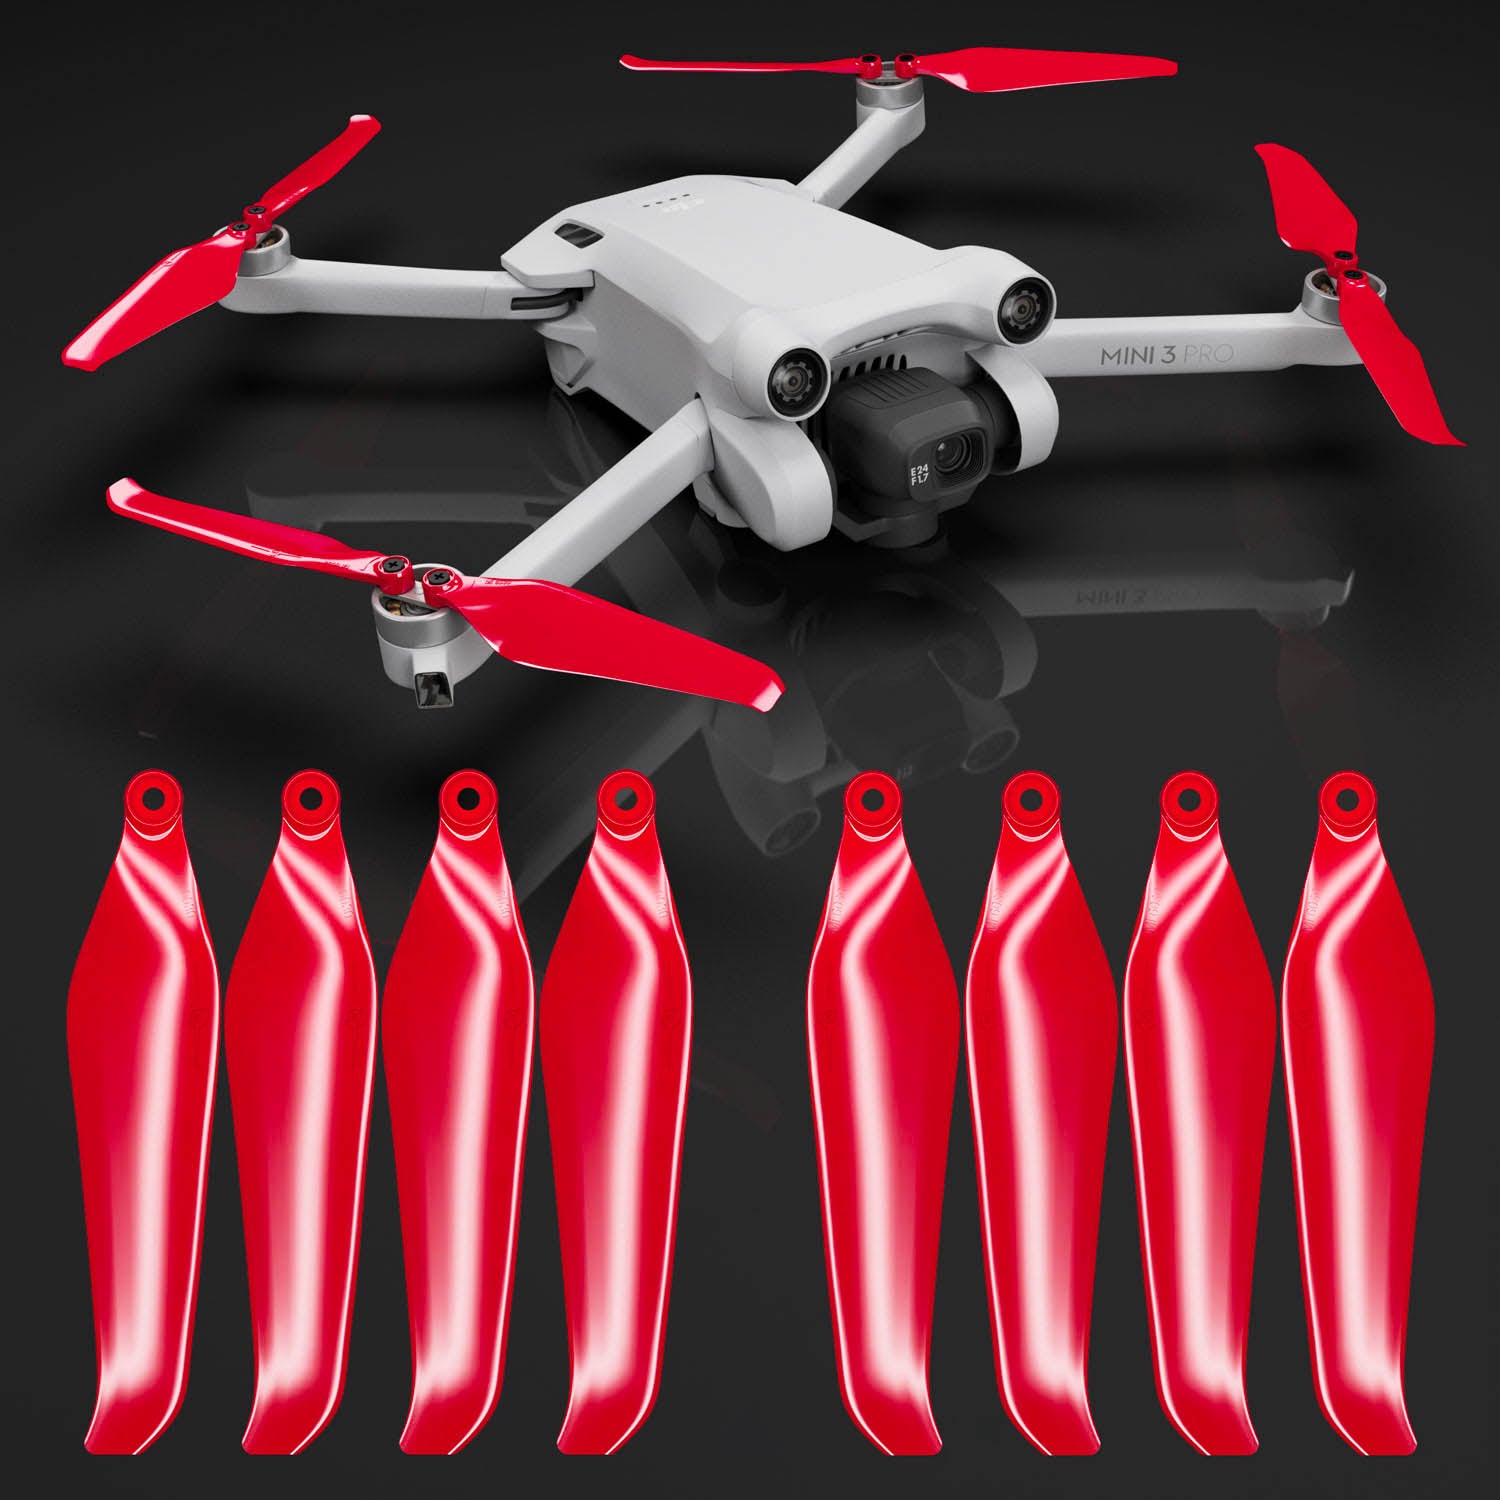 Master Airscrew Propellers  Extreme Performance and Efficiency